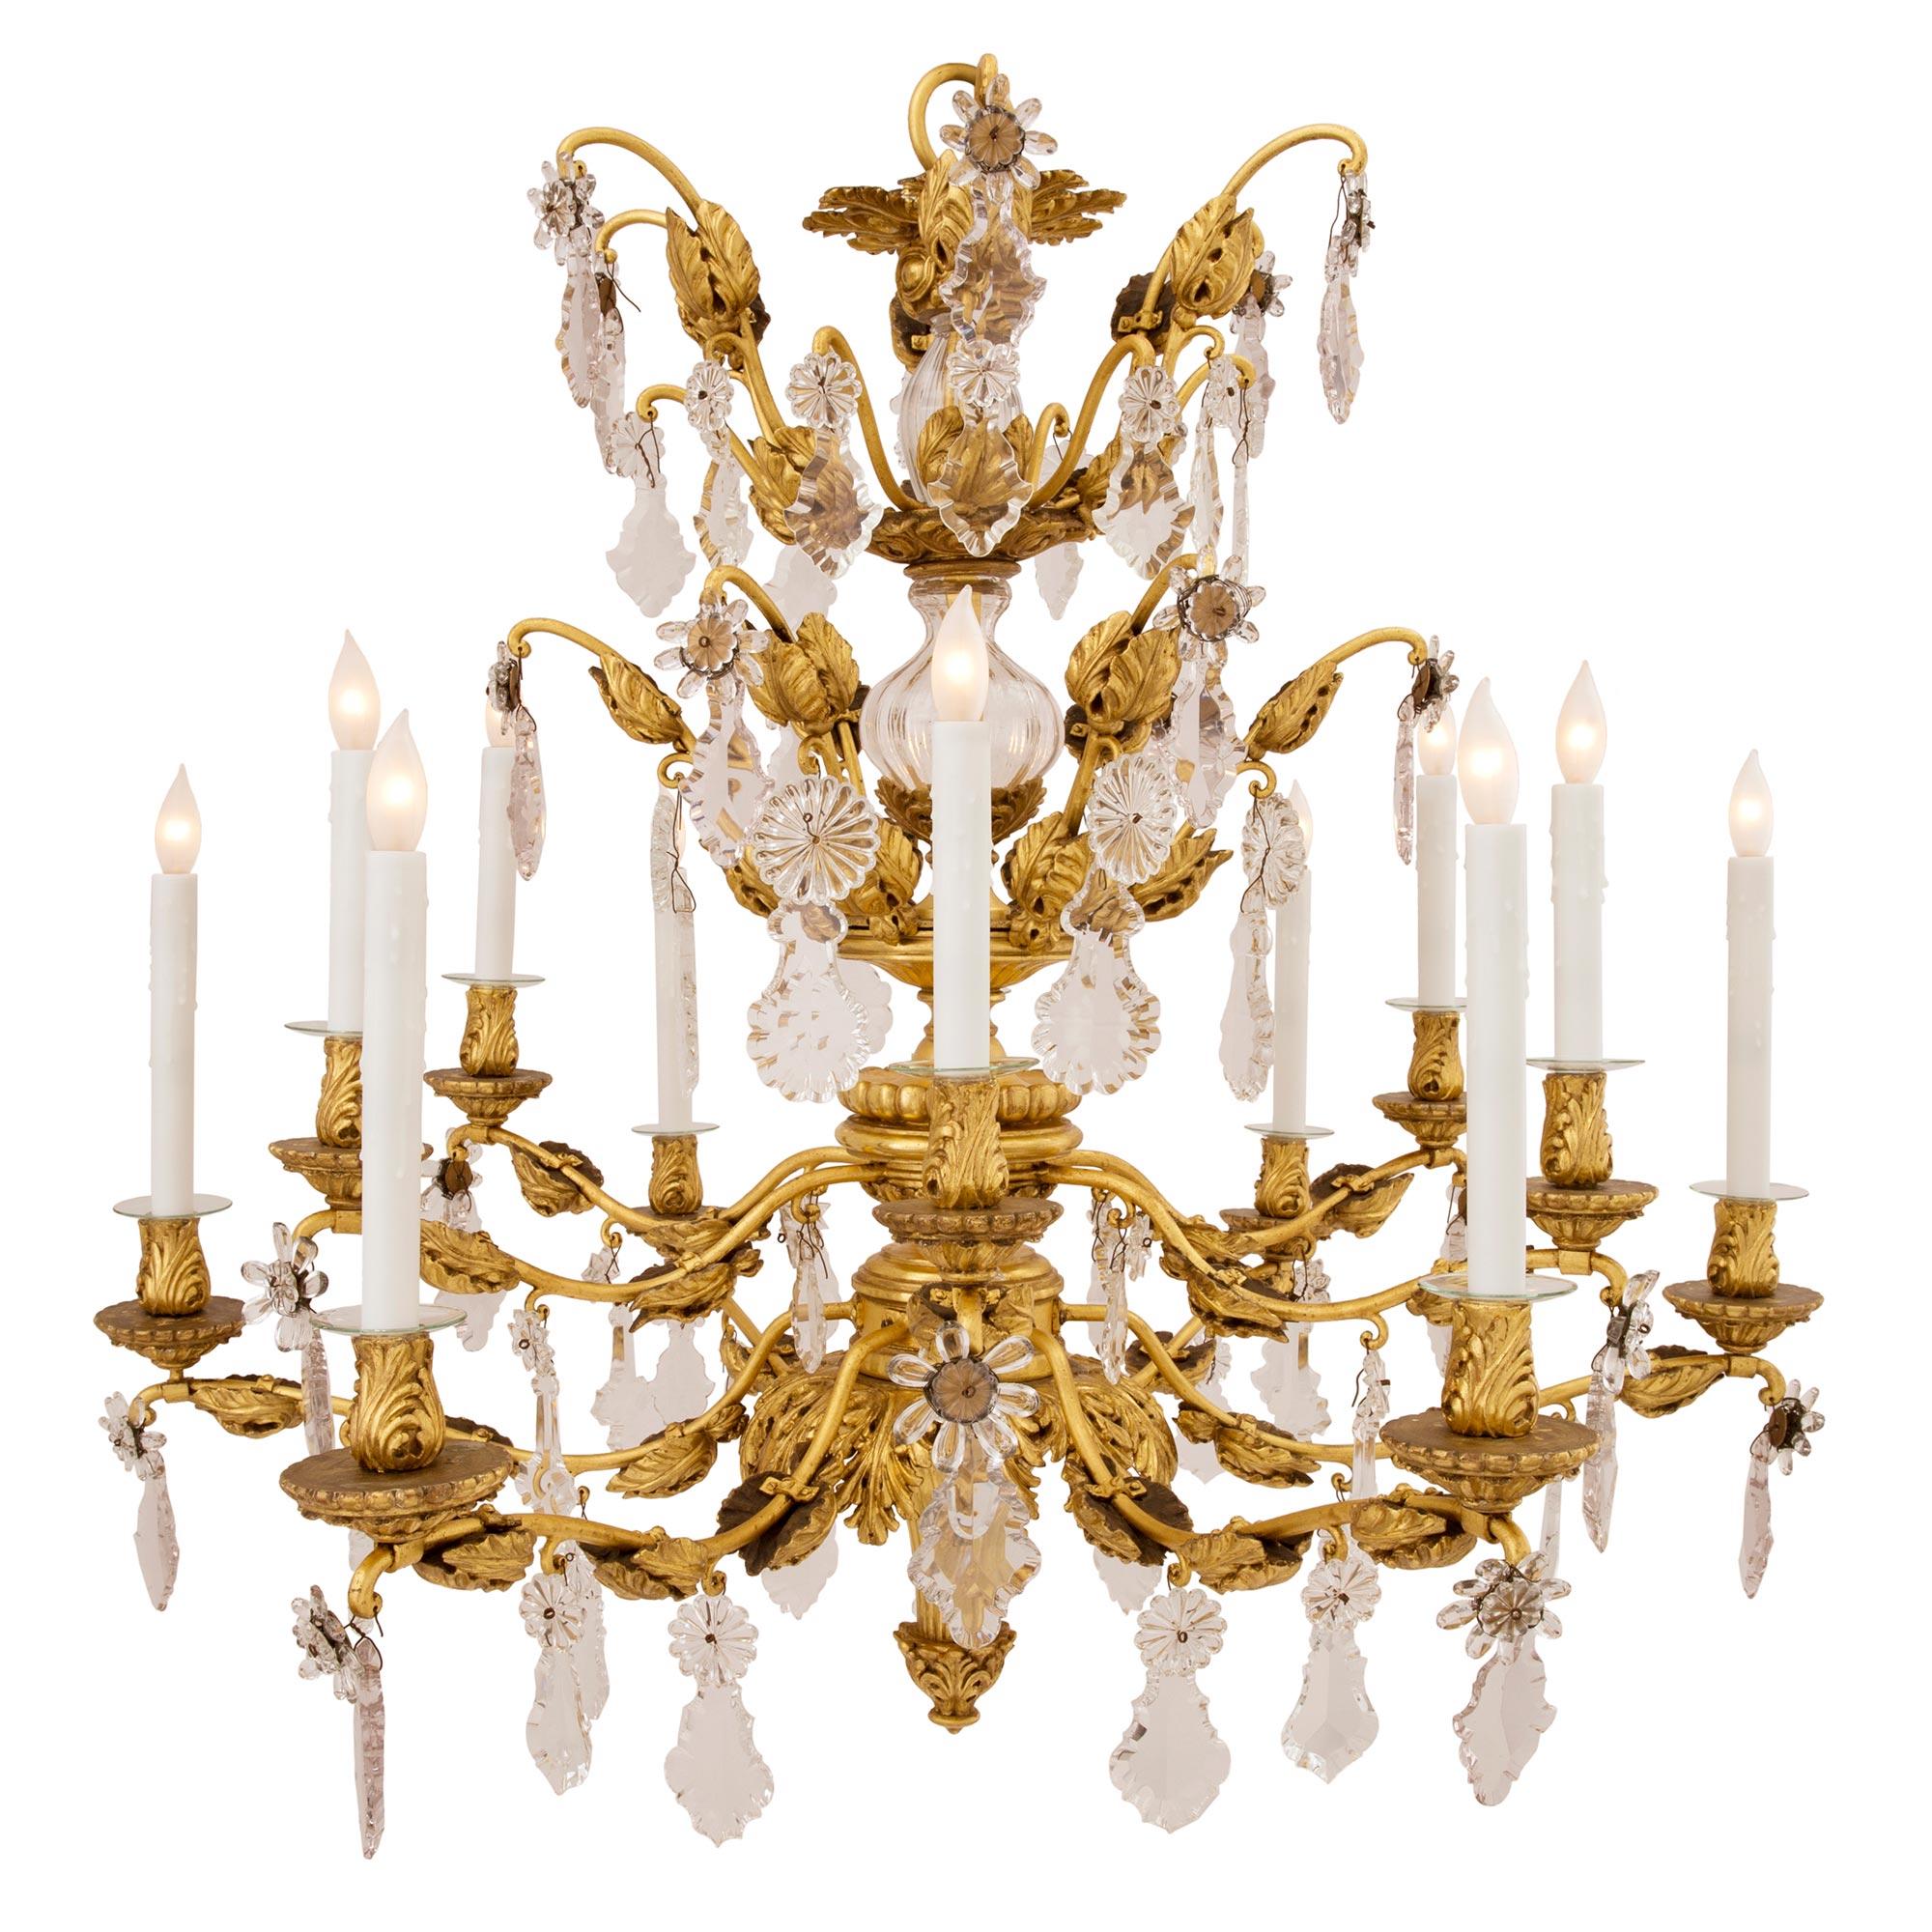 A stunning Italian early 19th century Tuscan giltwood, gilt metal and crystal twelve arm chandelier. The chandelier is centered by a beautiful bottom foliate finial with an elegant tapered spray shaped design. The twelve arms are spread over two